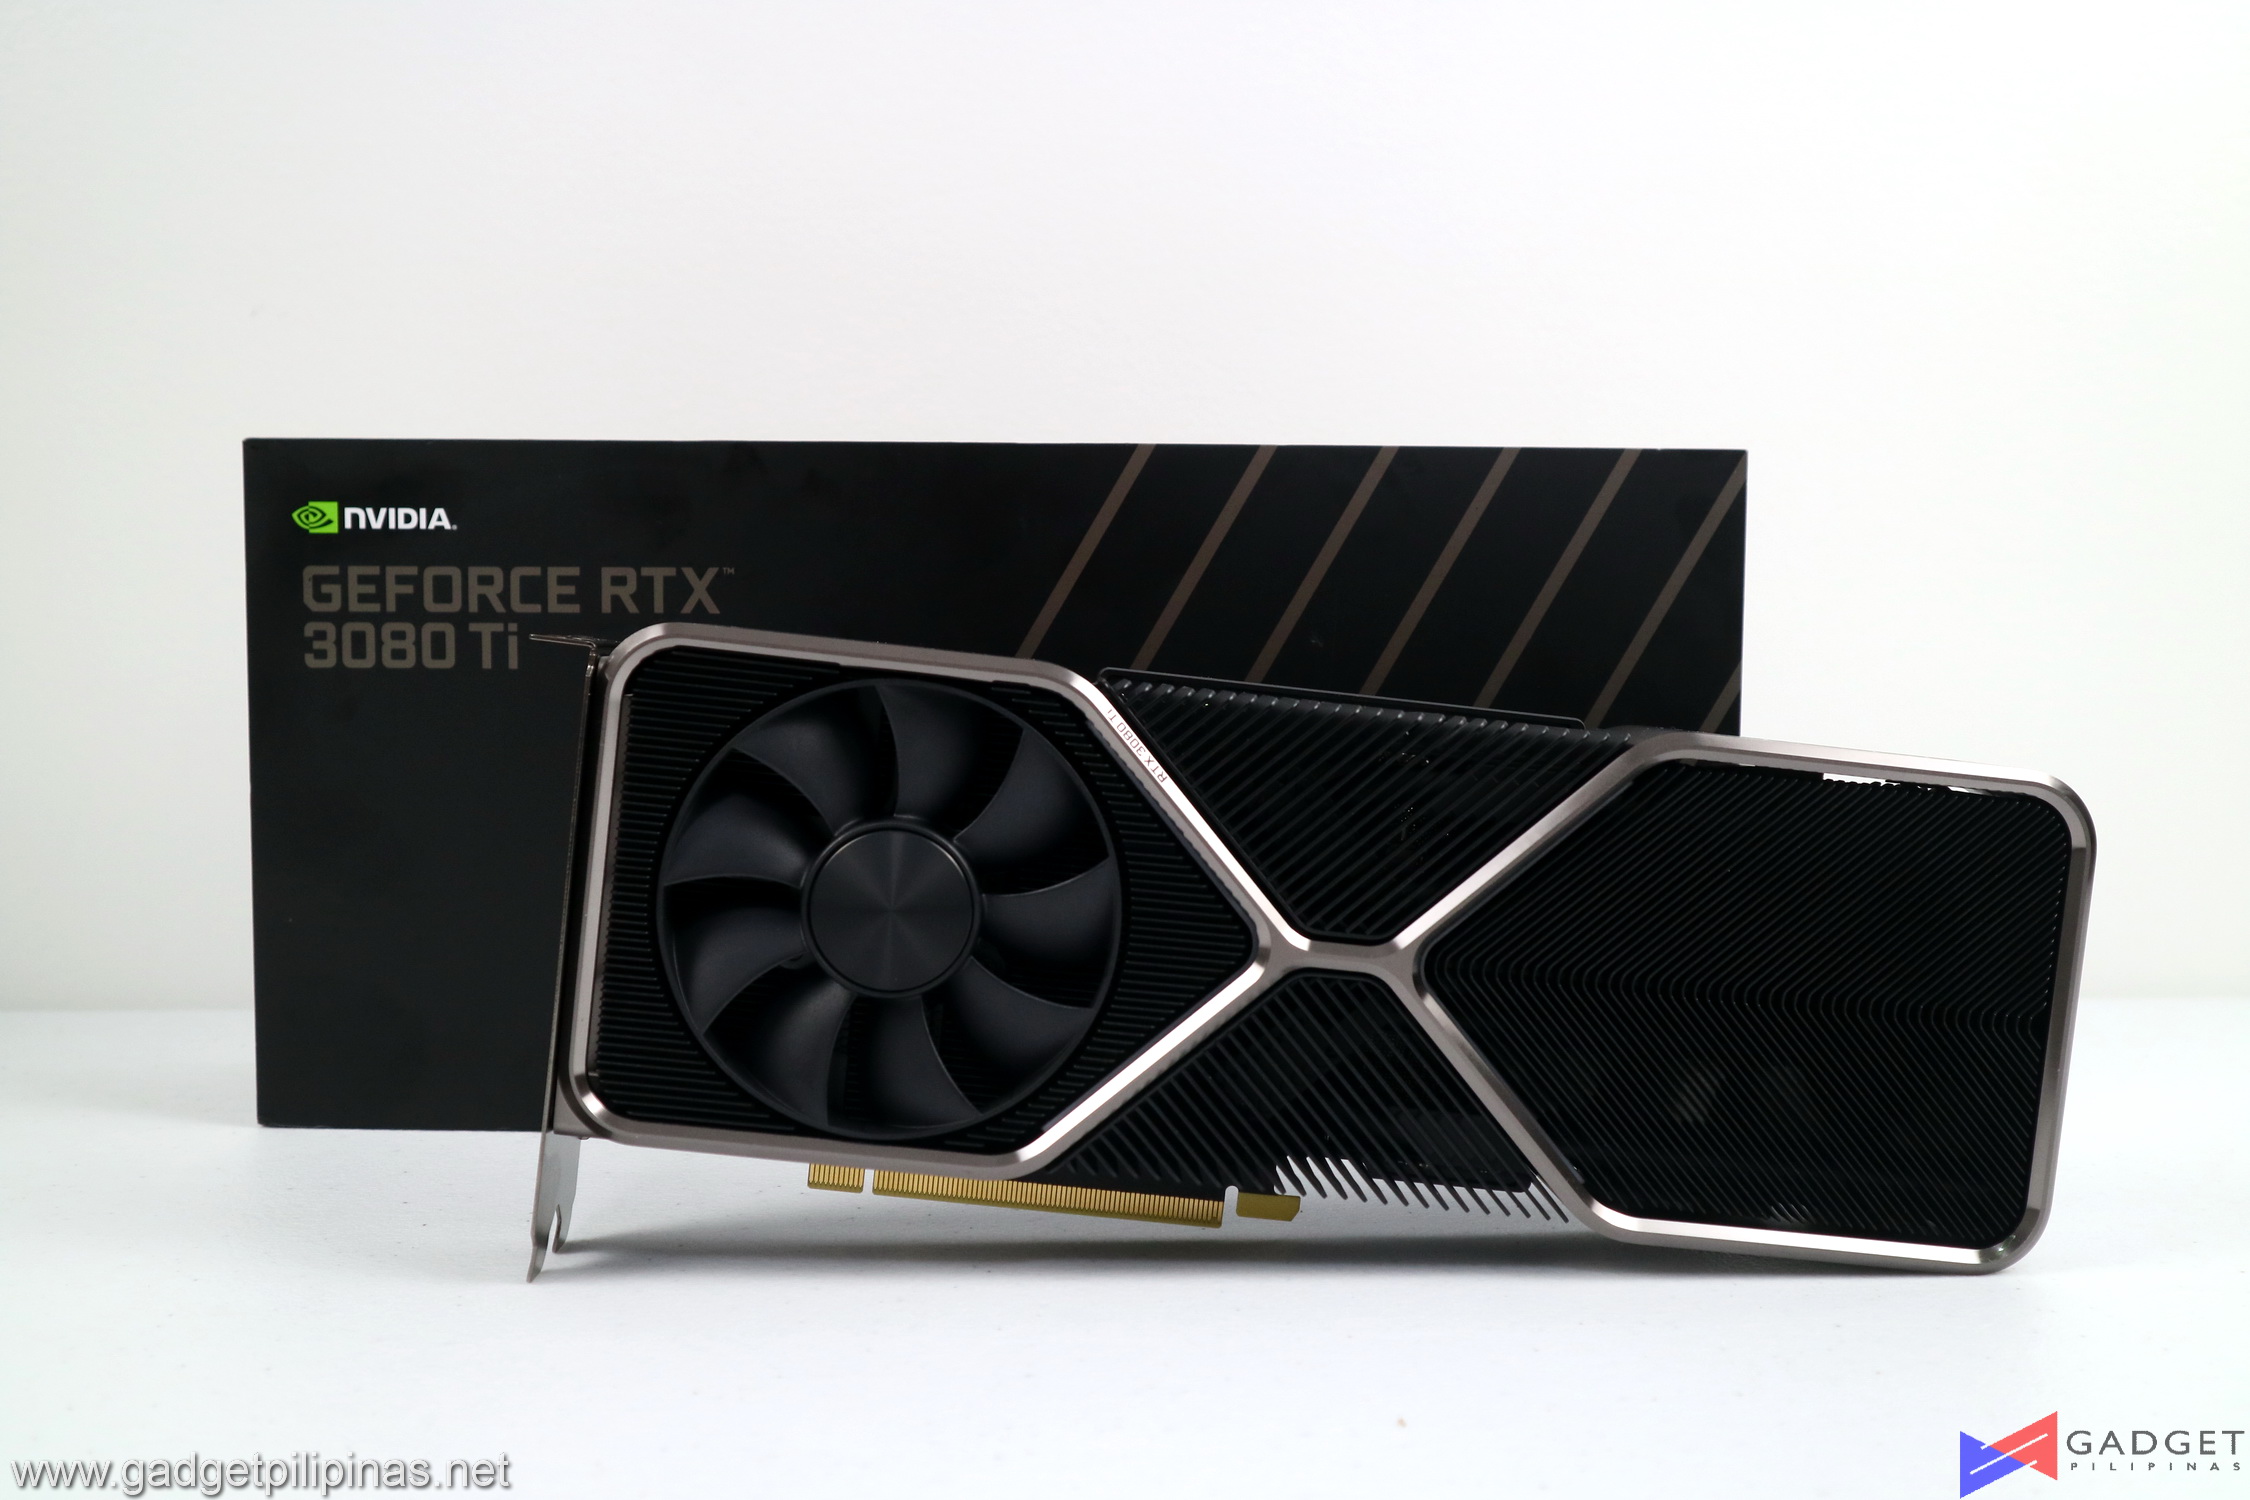 Nvidia GeForce RTX 3080 Ti Founders Edition Graphics Card Review – The Must Have Flagship Gaming GPU